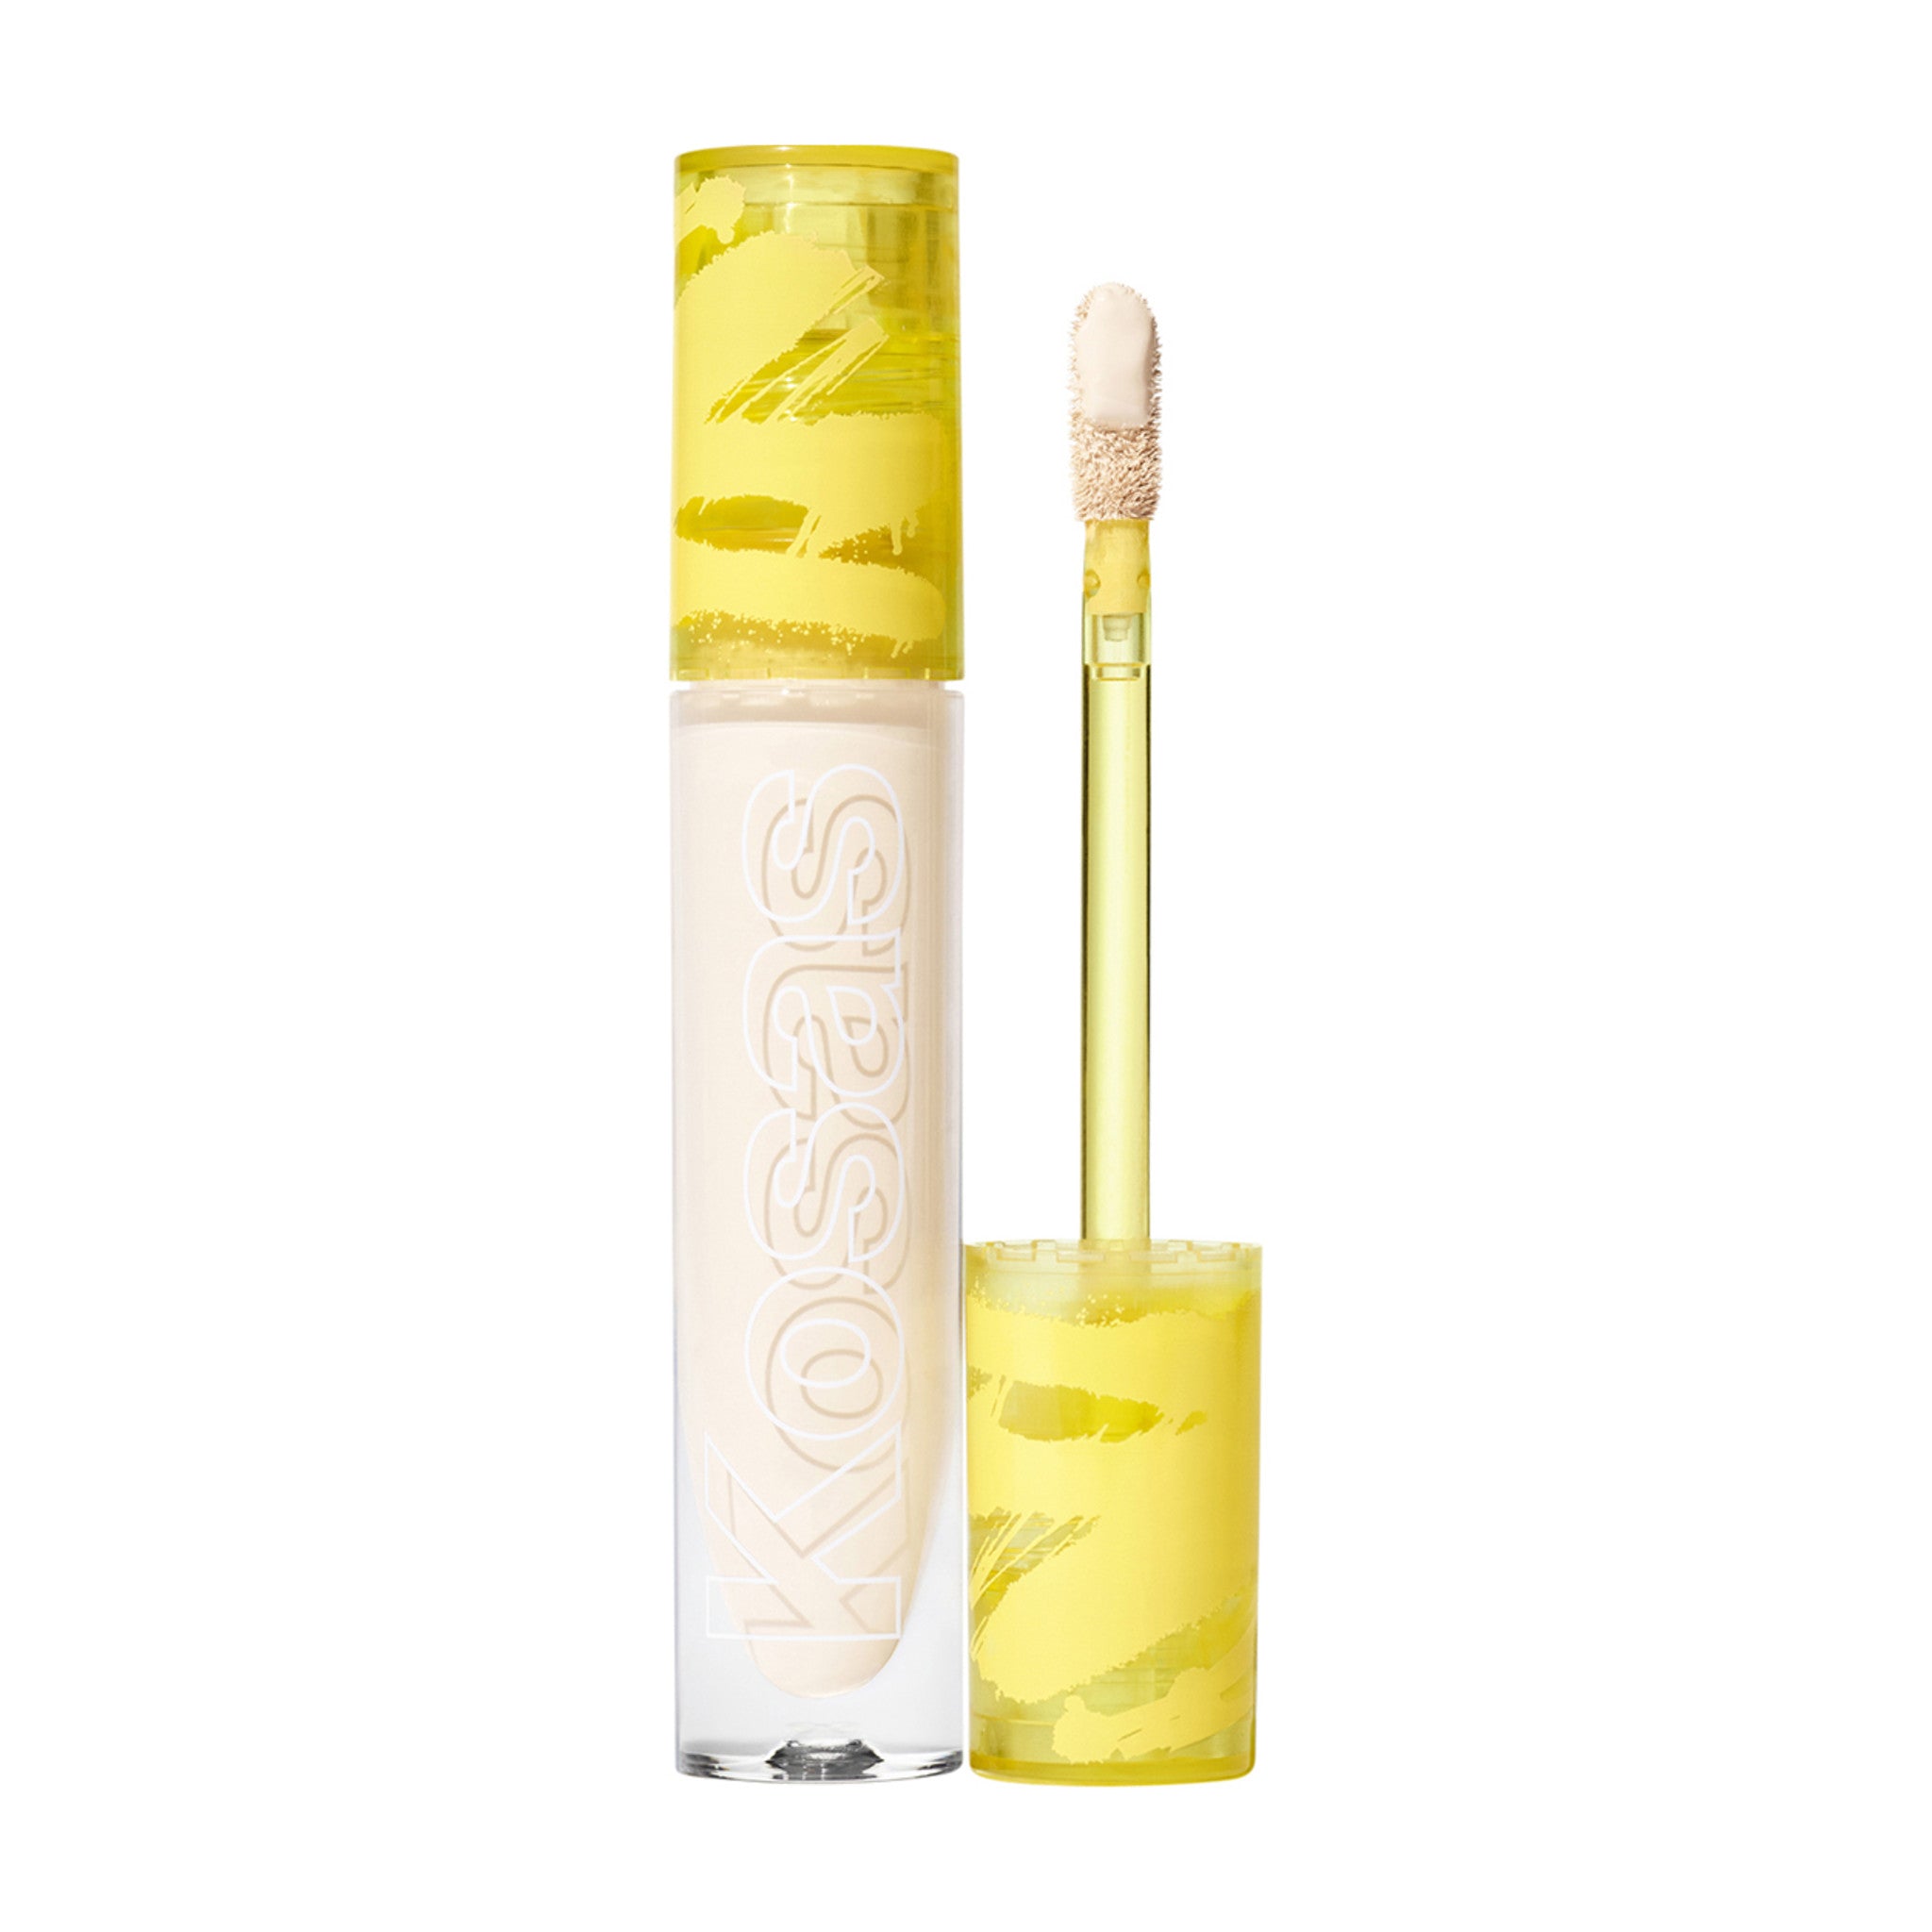 Kosas Revealer Concealer Color/Shade variant: Tone 0.5 N main image. This product is for light neutral beige complexions